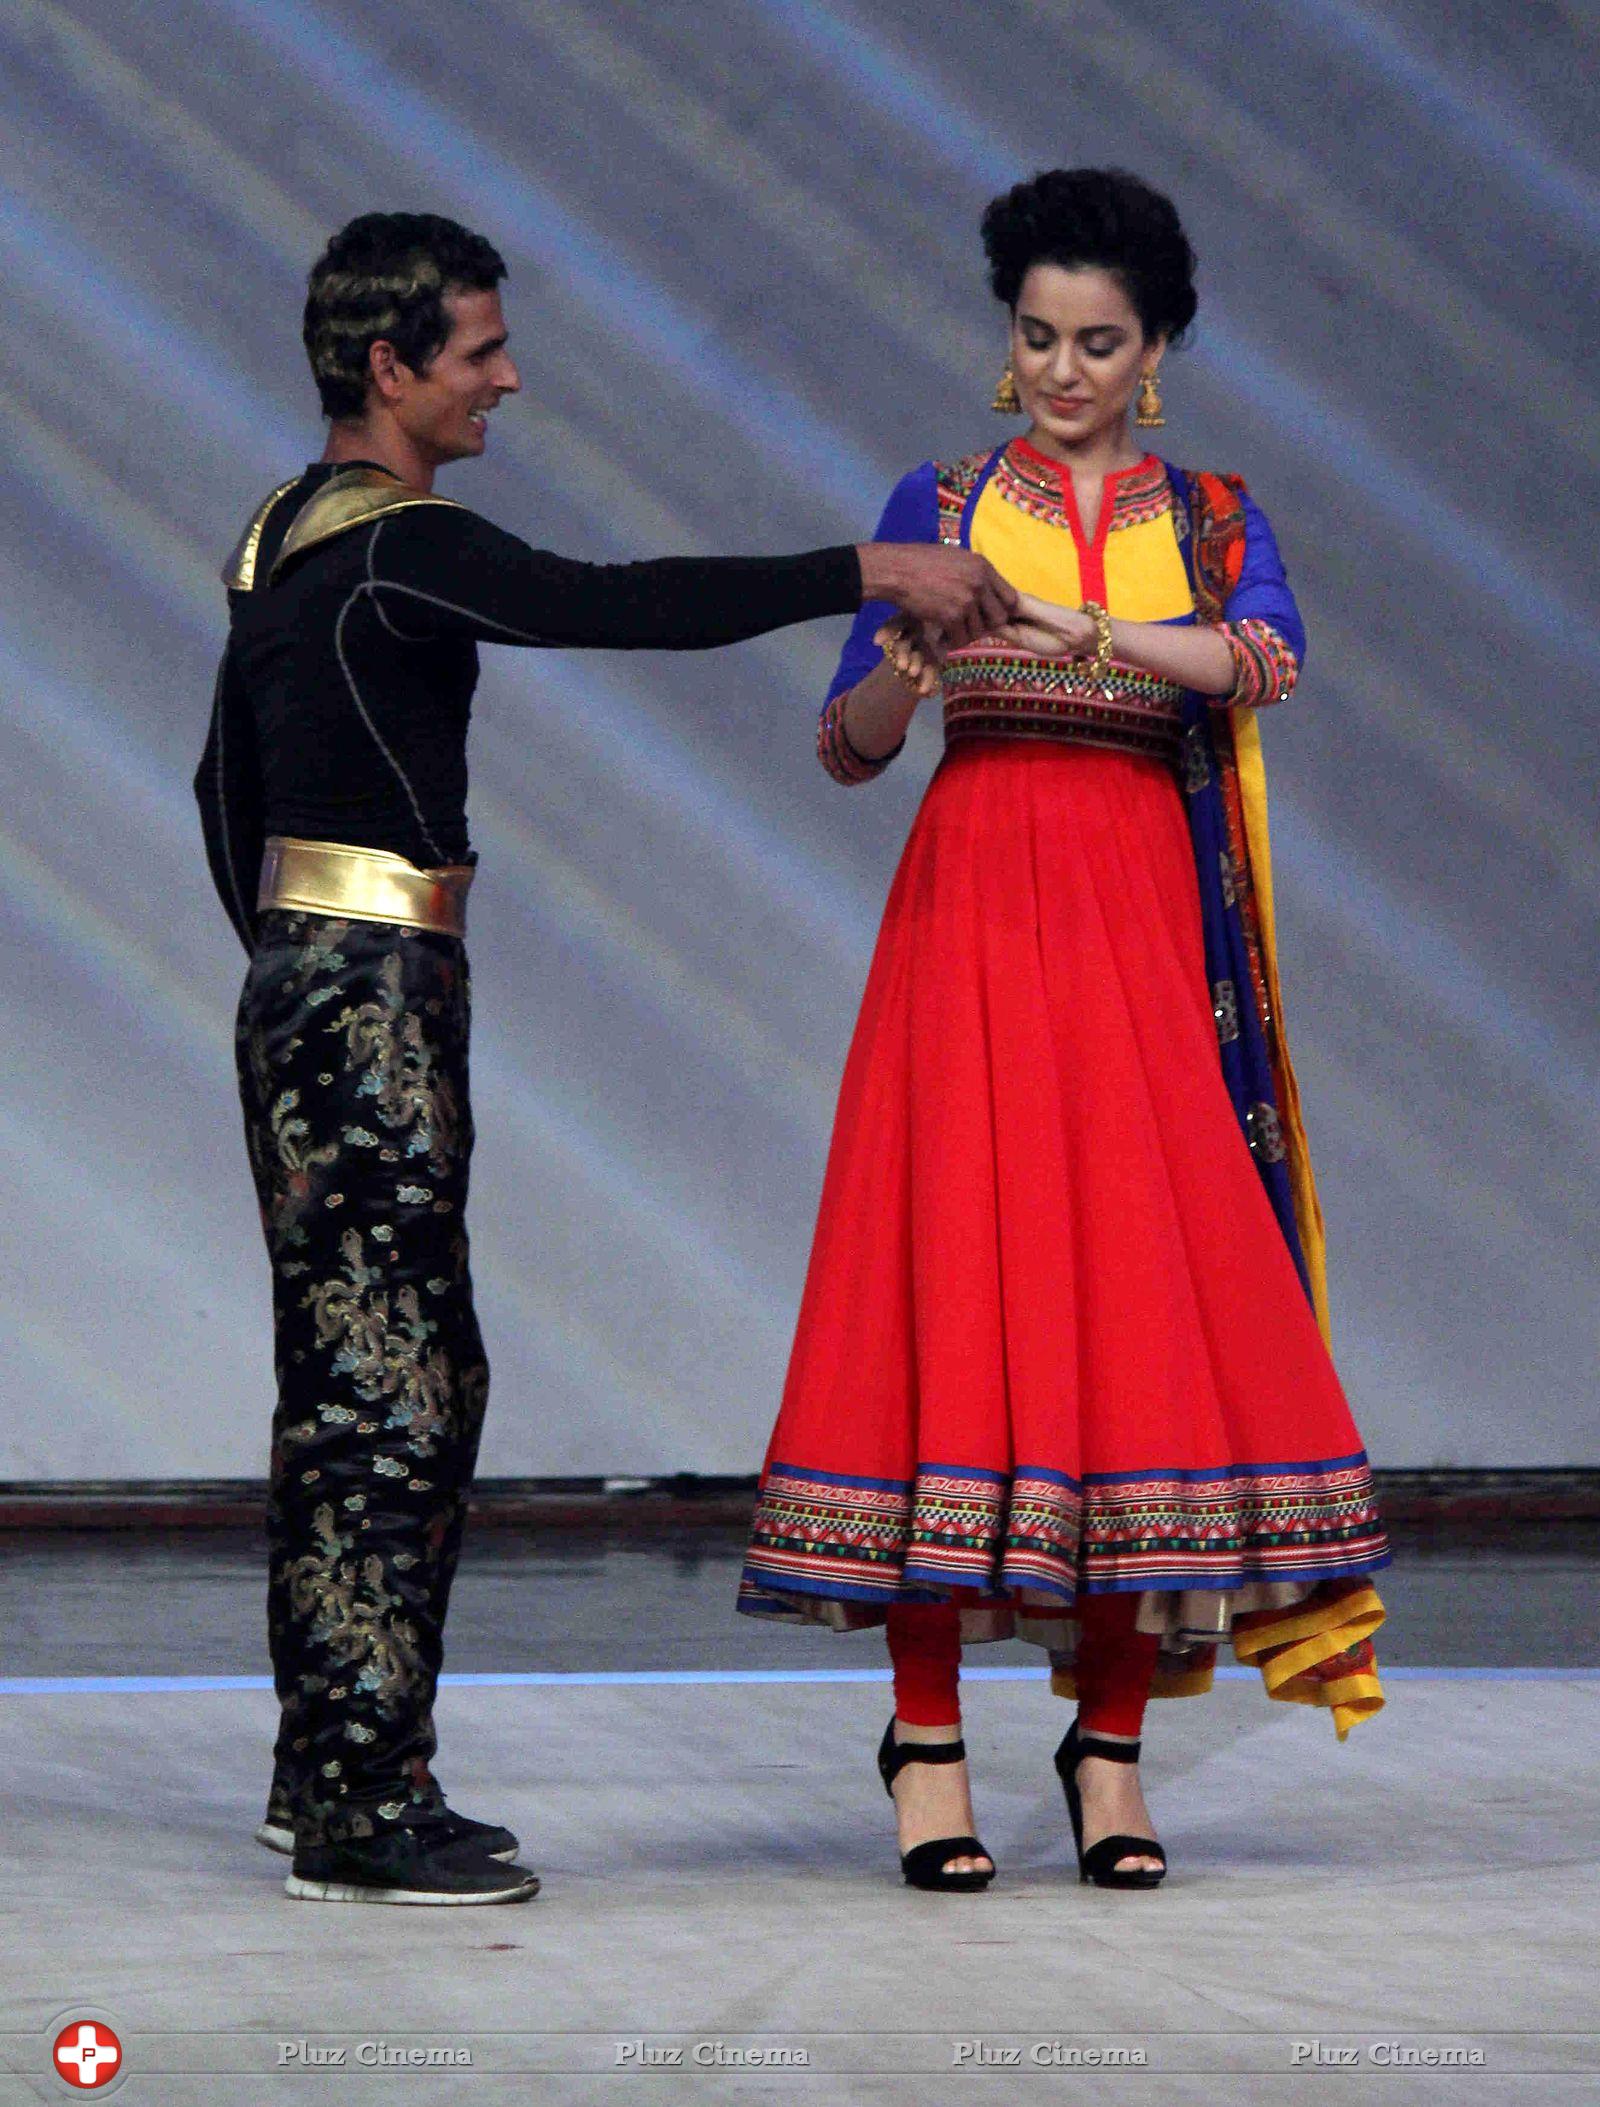 Kangana Ranaut - Promotion of film Queen on sets of Indias Got Talent Season 5 Photos | Picture 717412